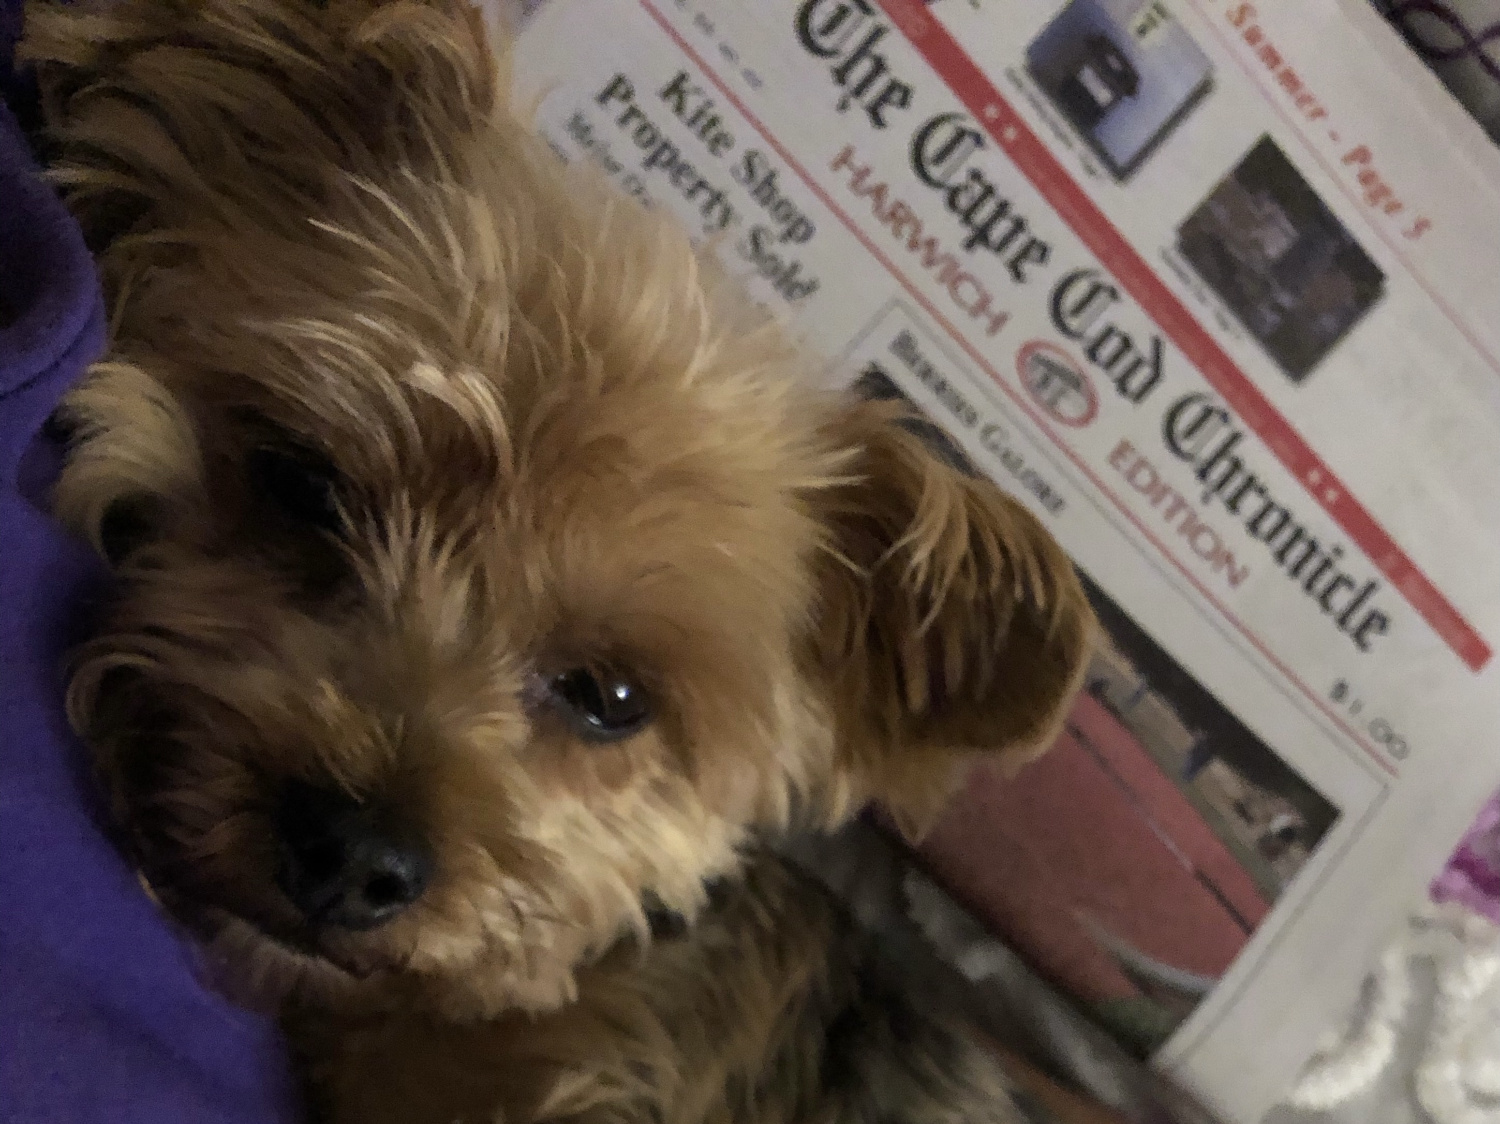 Terrier puppy with Cape Cod Chronicle Harwich edition in background